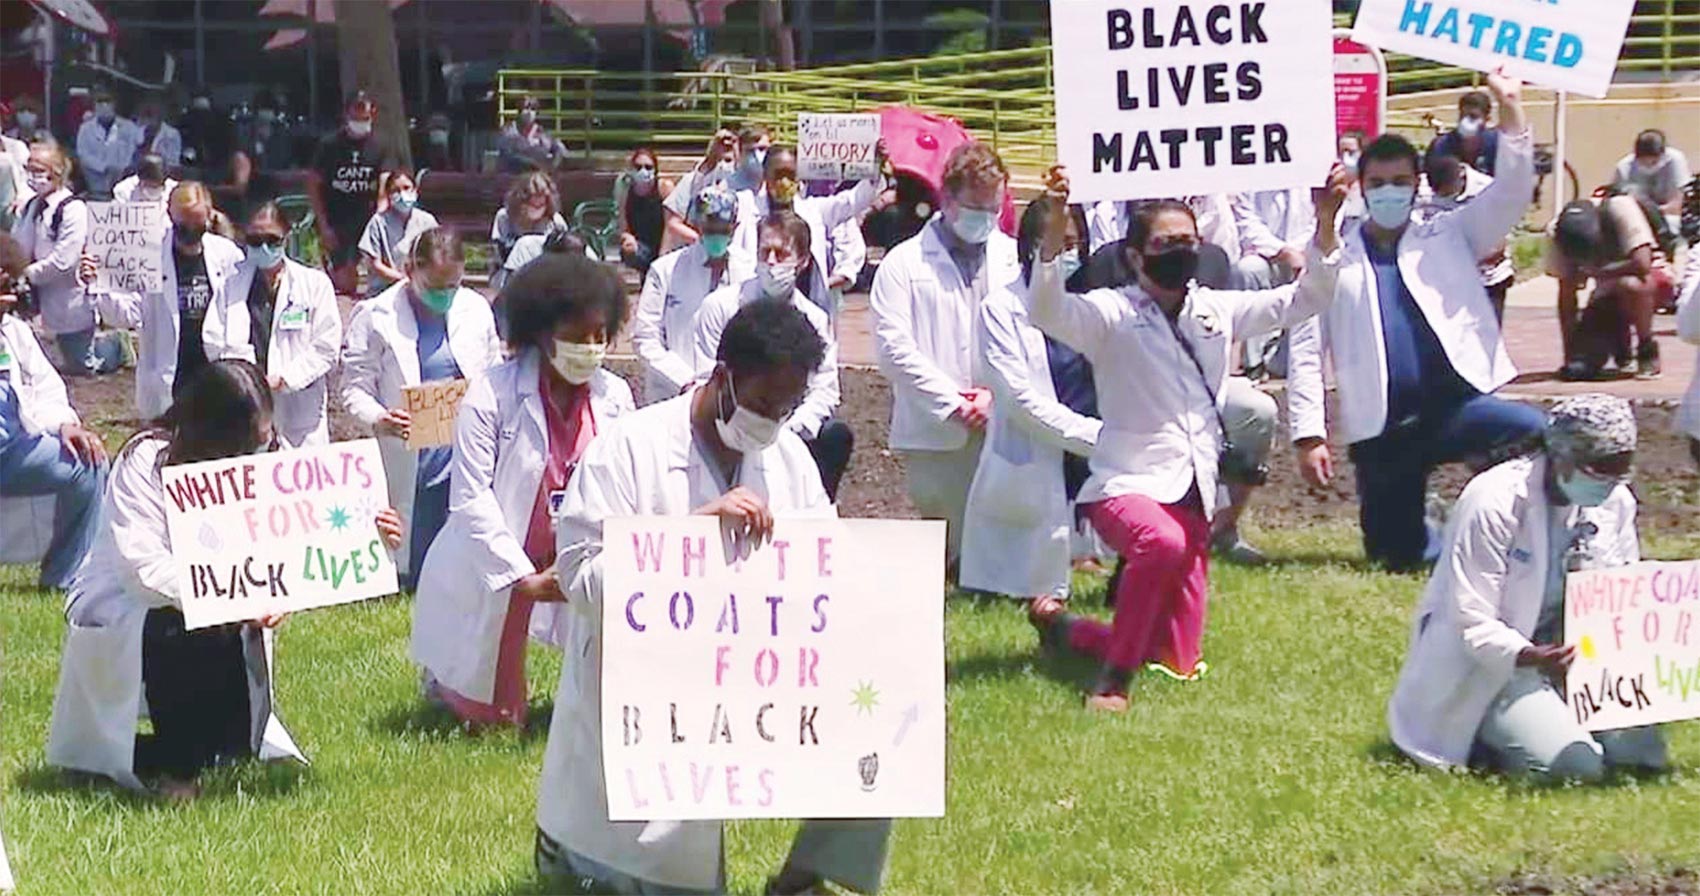 Medical workers show their support for Black Lives Matter